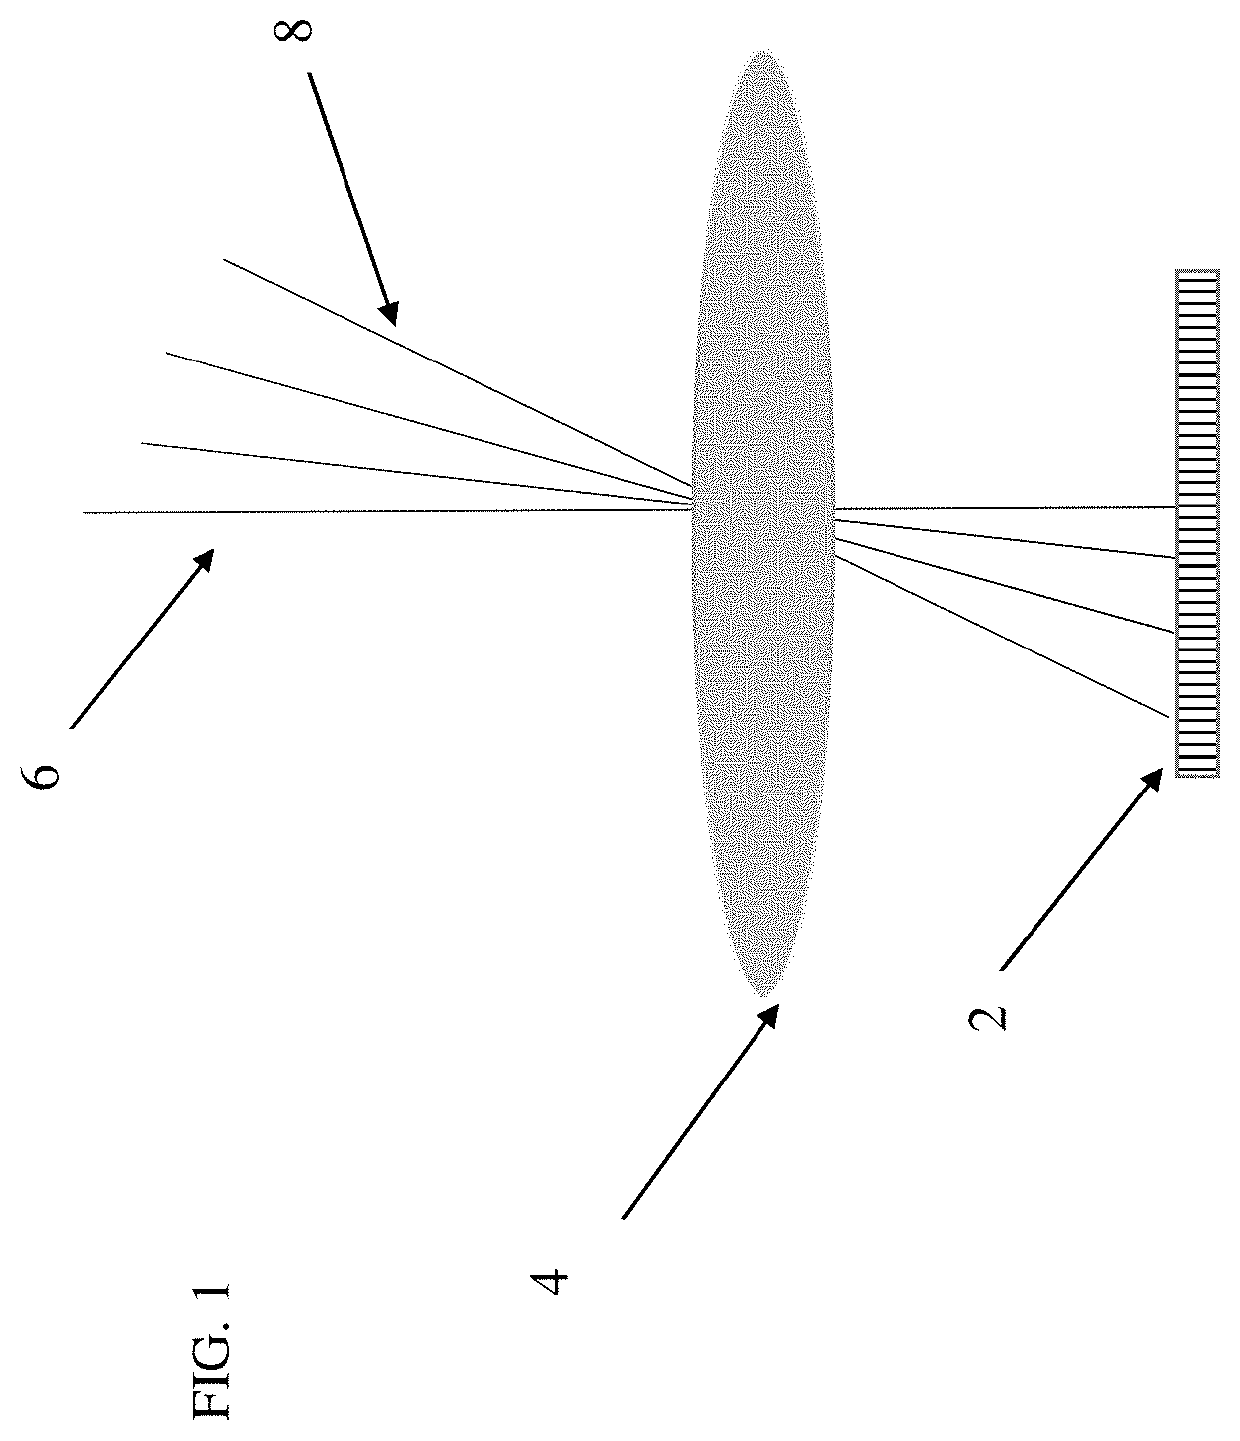 Non-linear optical mapping of sal seeker detector array